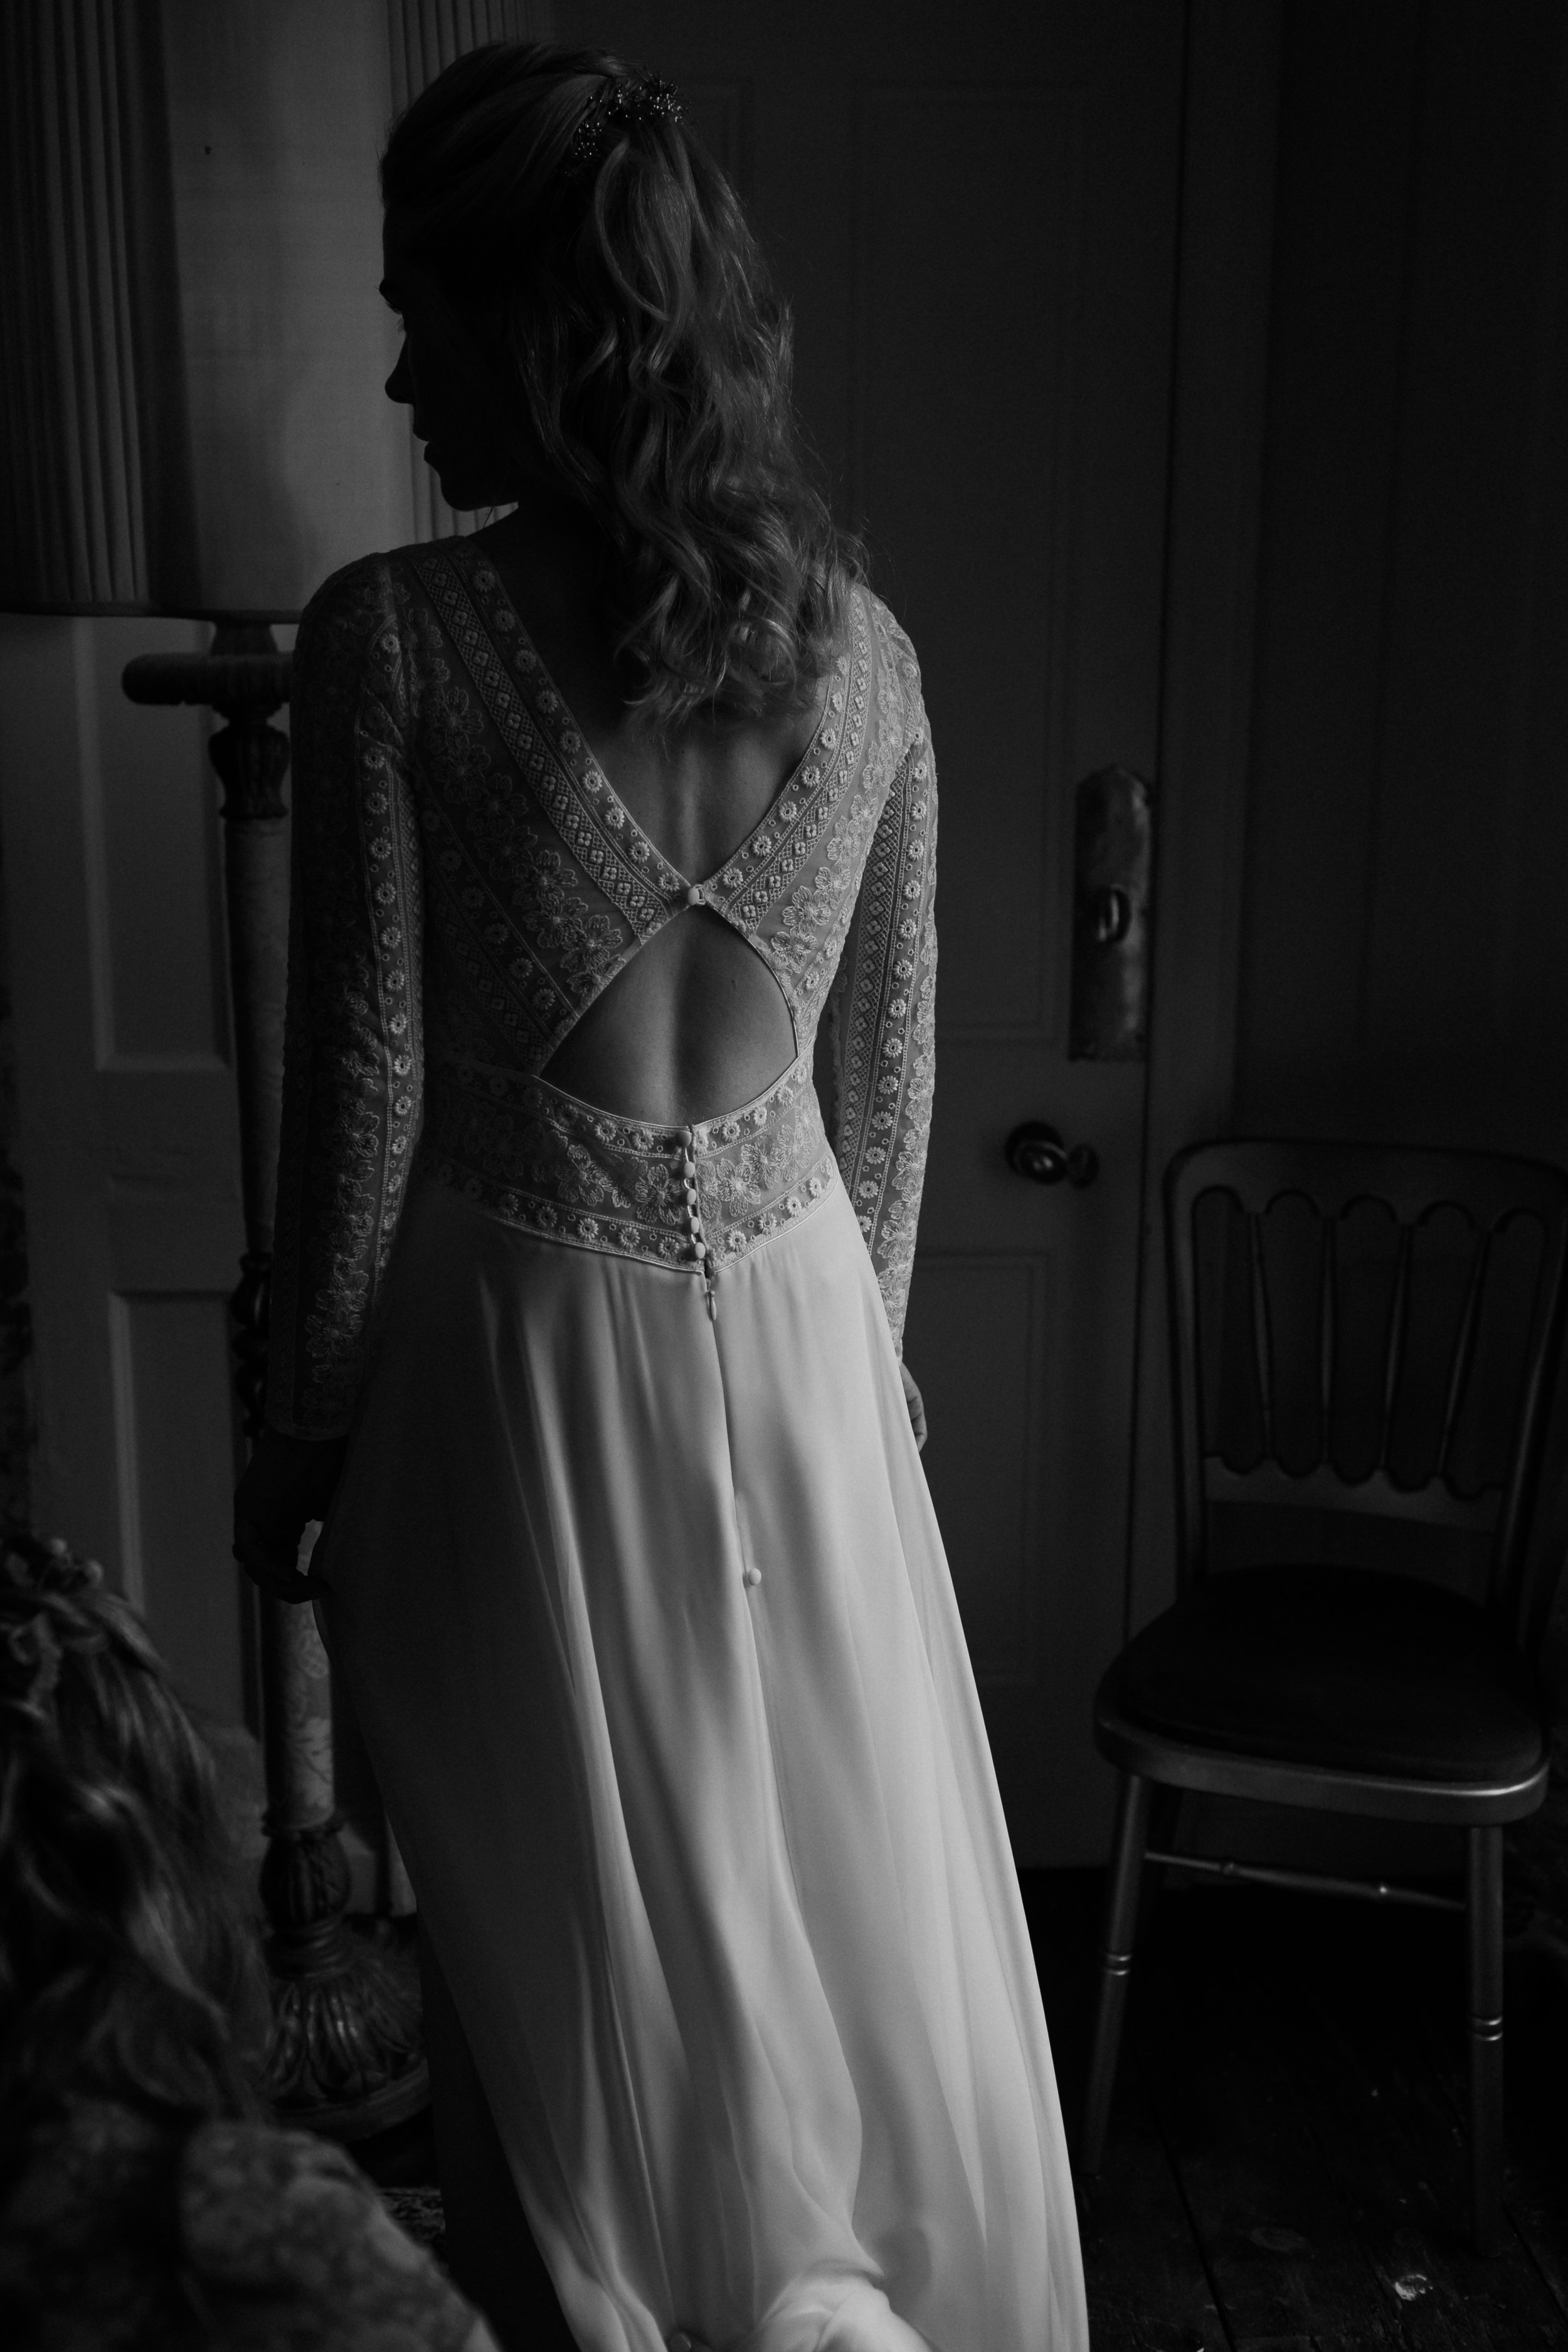 The back of the wedding dress